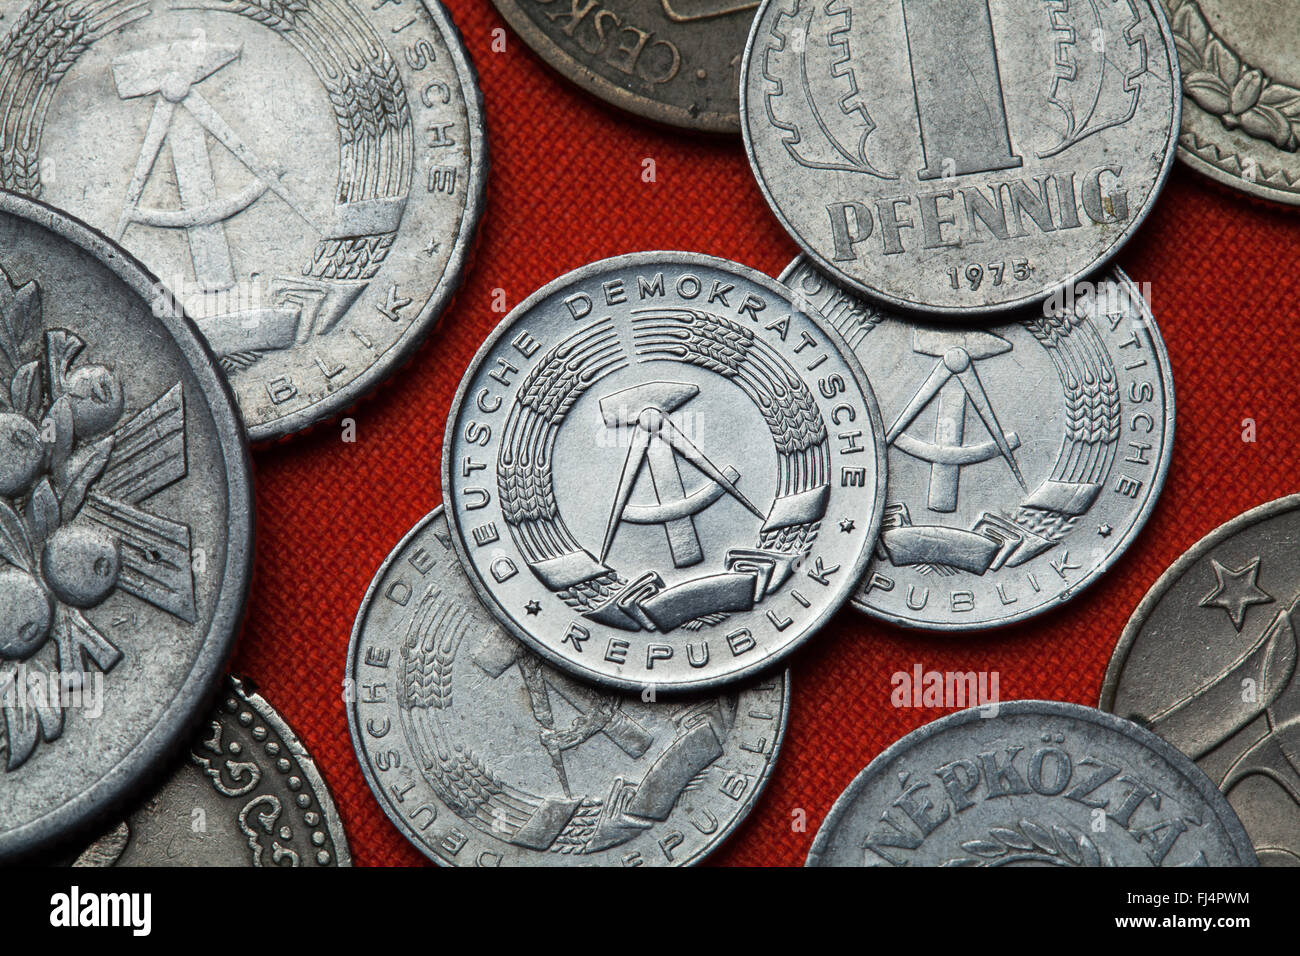 Coins of East Germany. Coat of arms of the German Democratic Republic depicted in the East German one pfennig coin (1968). Stock Photo